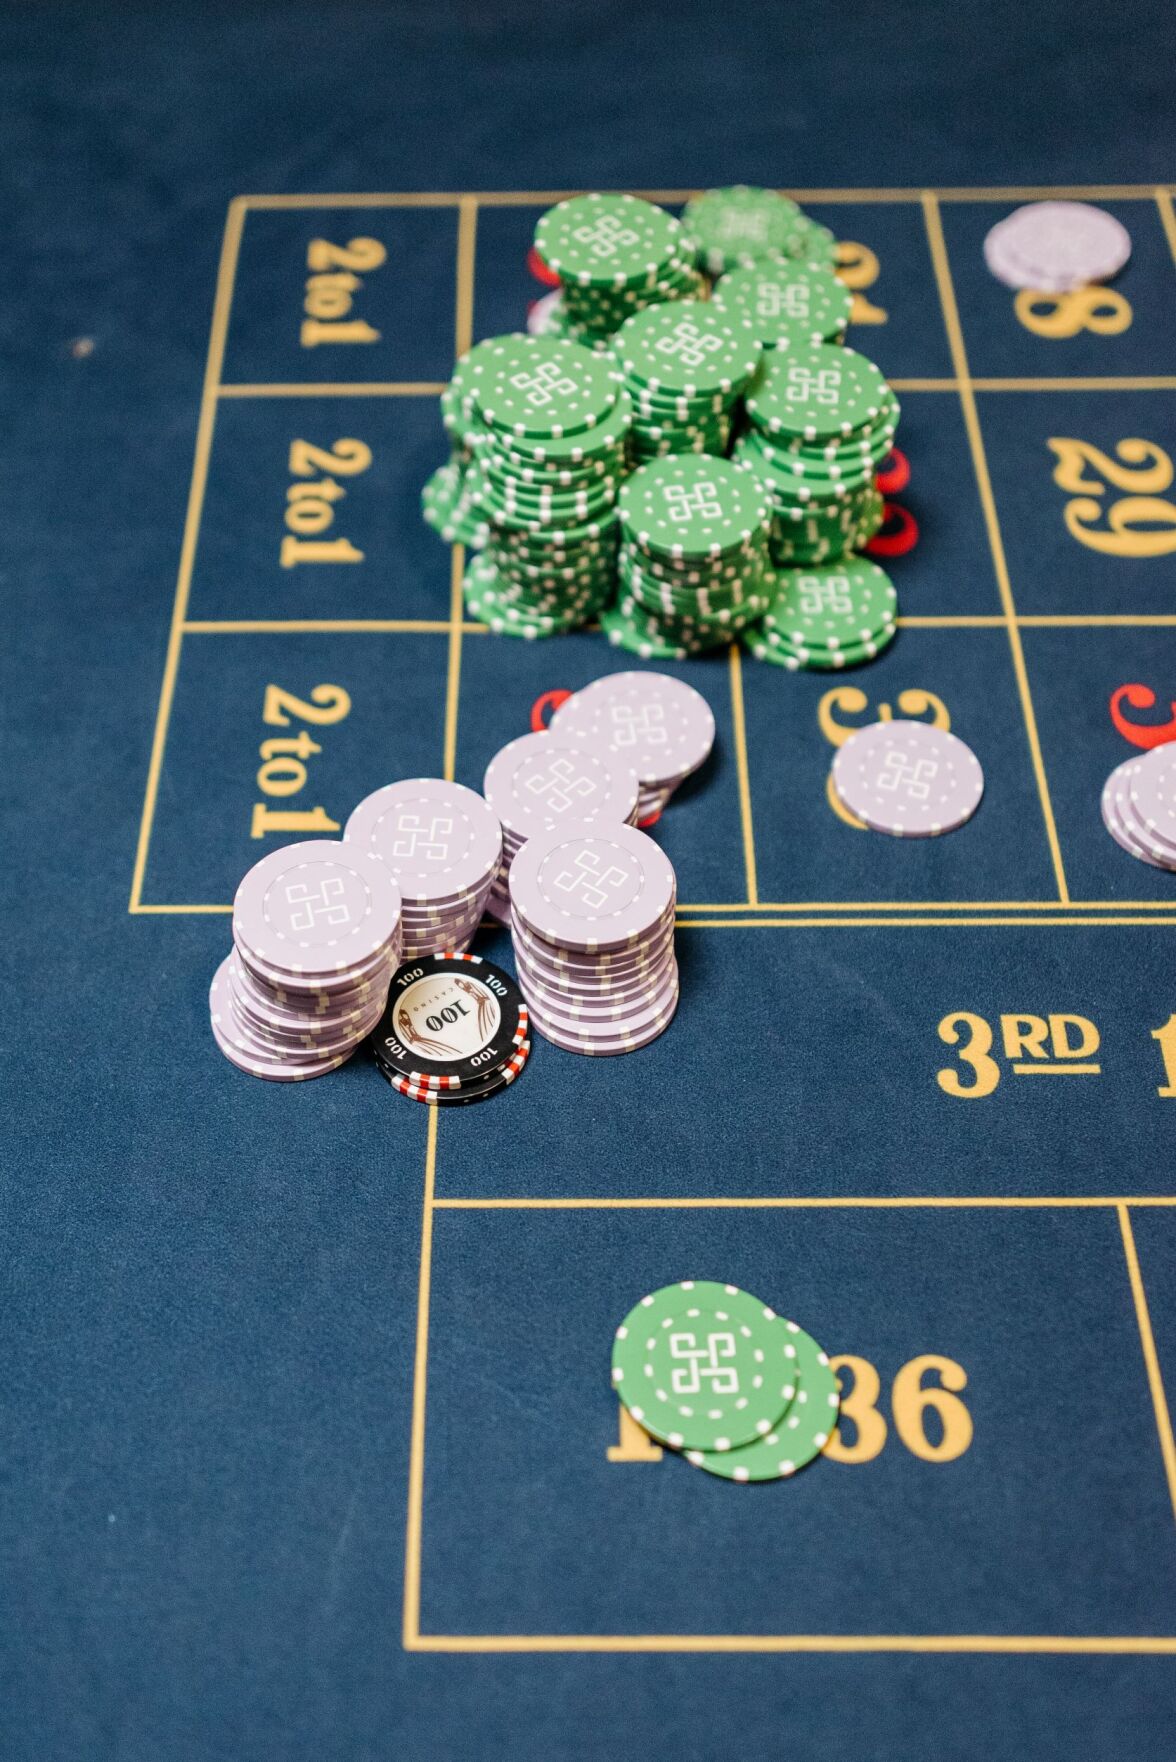 How To Buy casinos On A Tight Budget